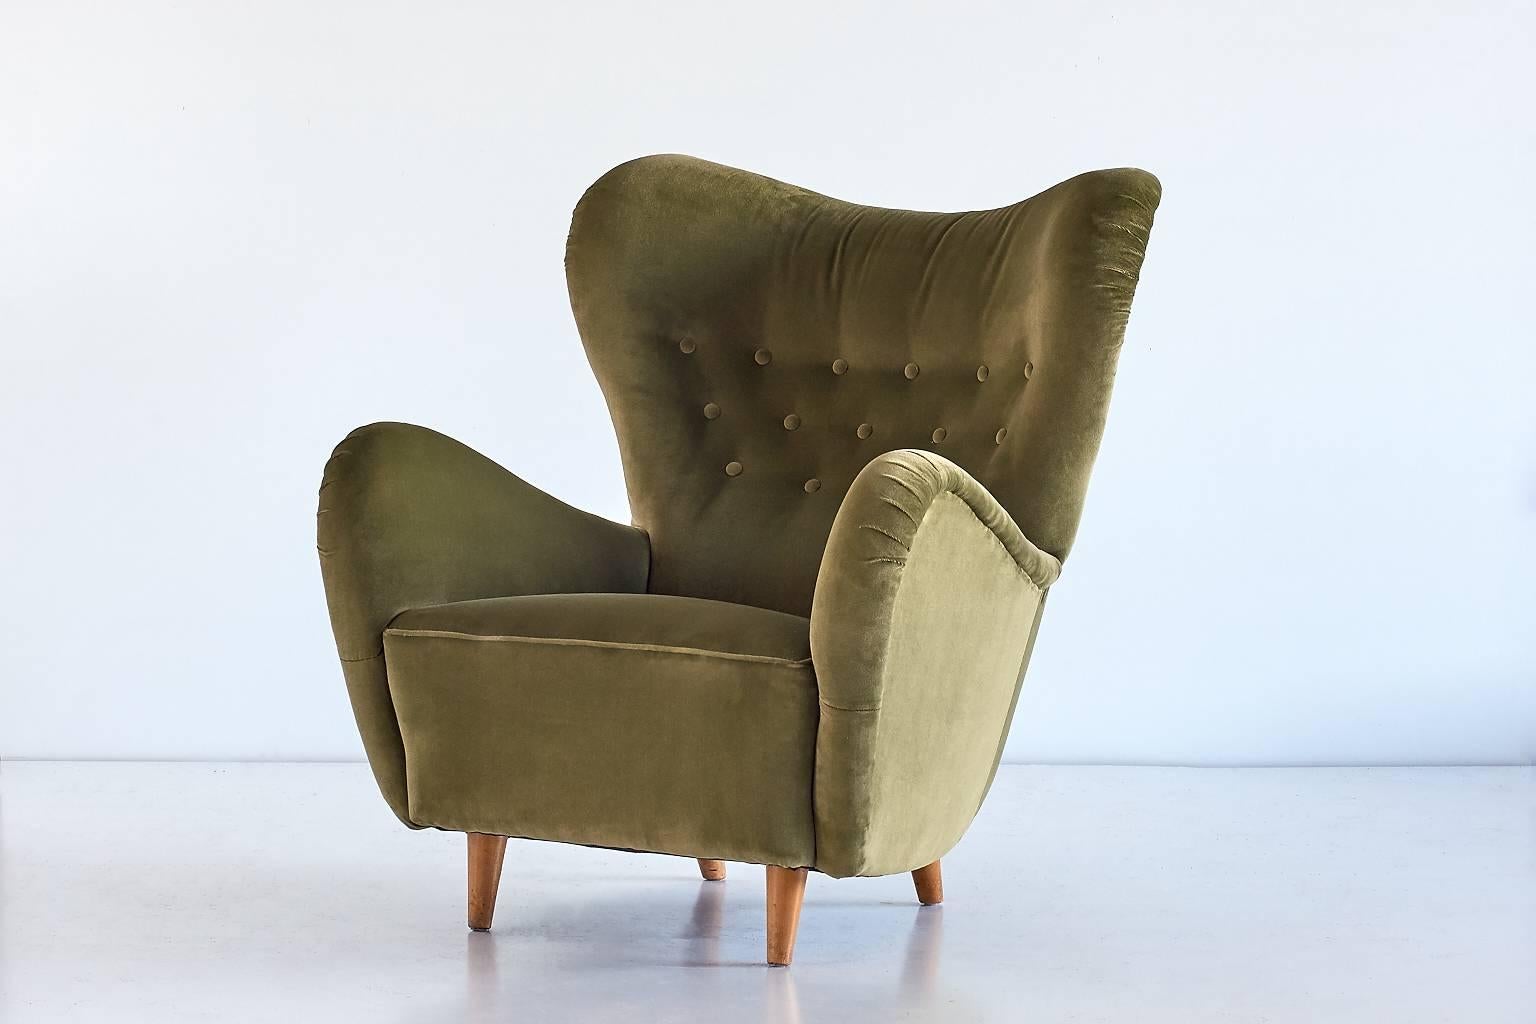 Mid-20th Century Wingback Lounge Chair by Otto Schultz for Boet, Sweden, 1946